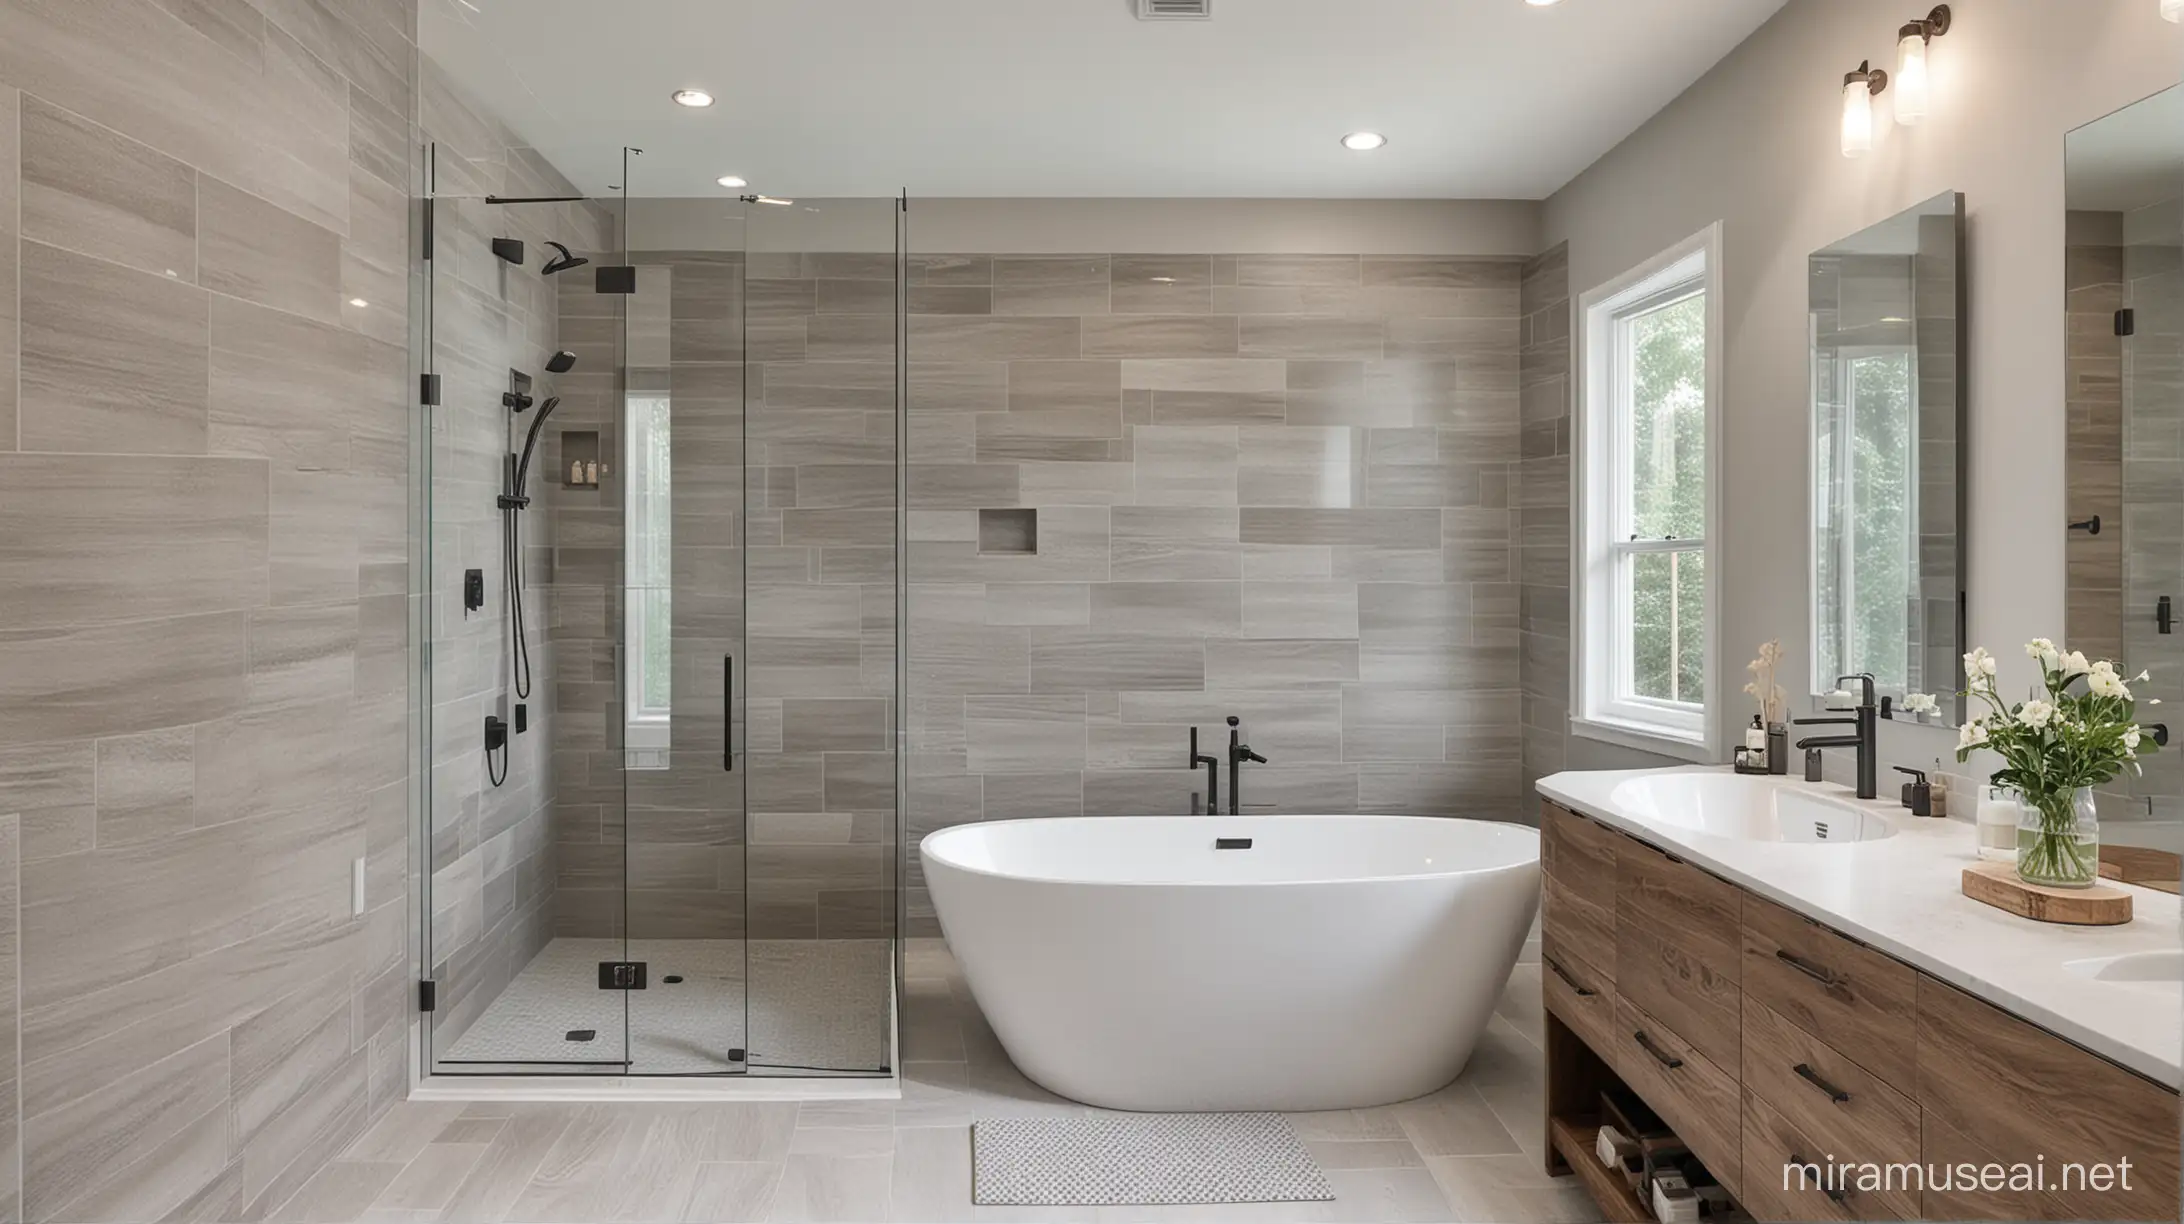 Contemporary Master Bath with Freestanding Tub and Greige Tile Shower